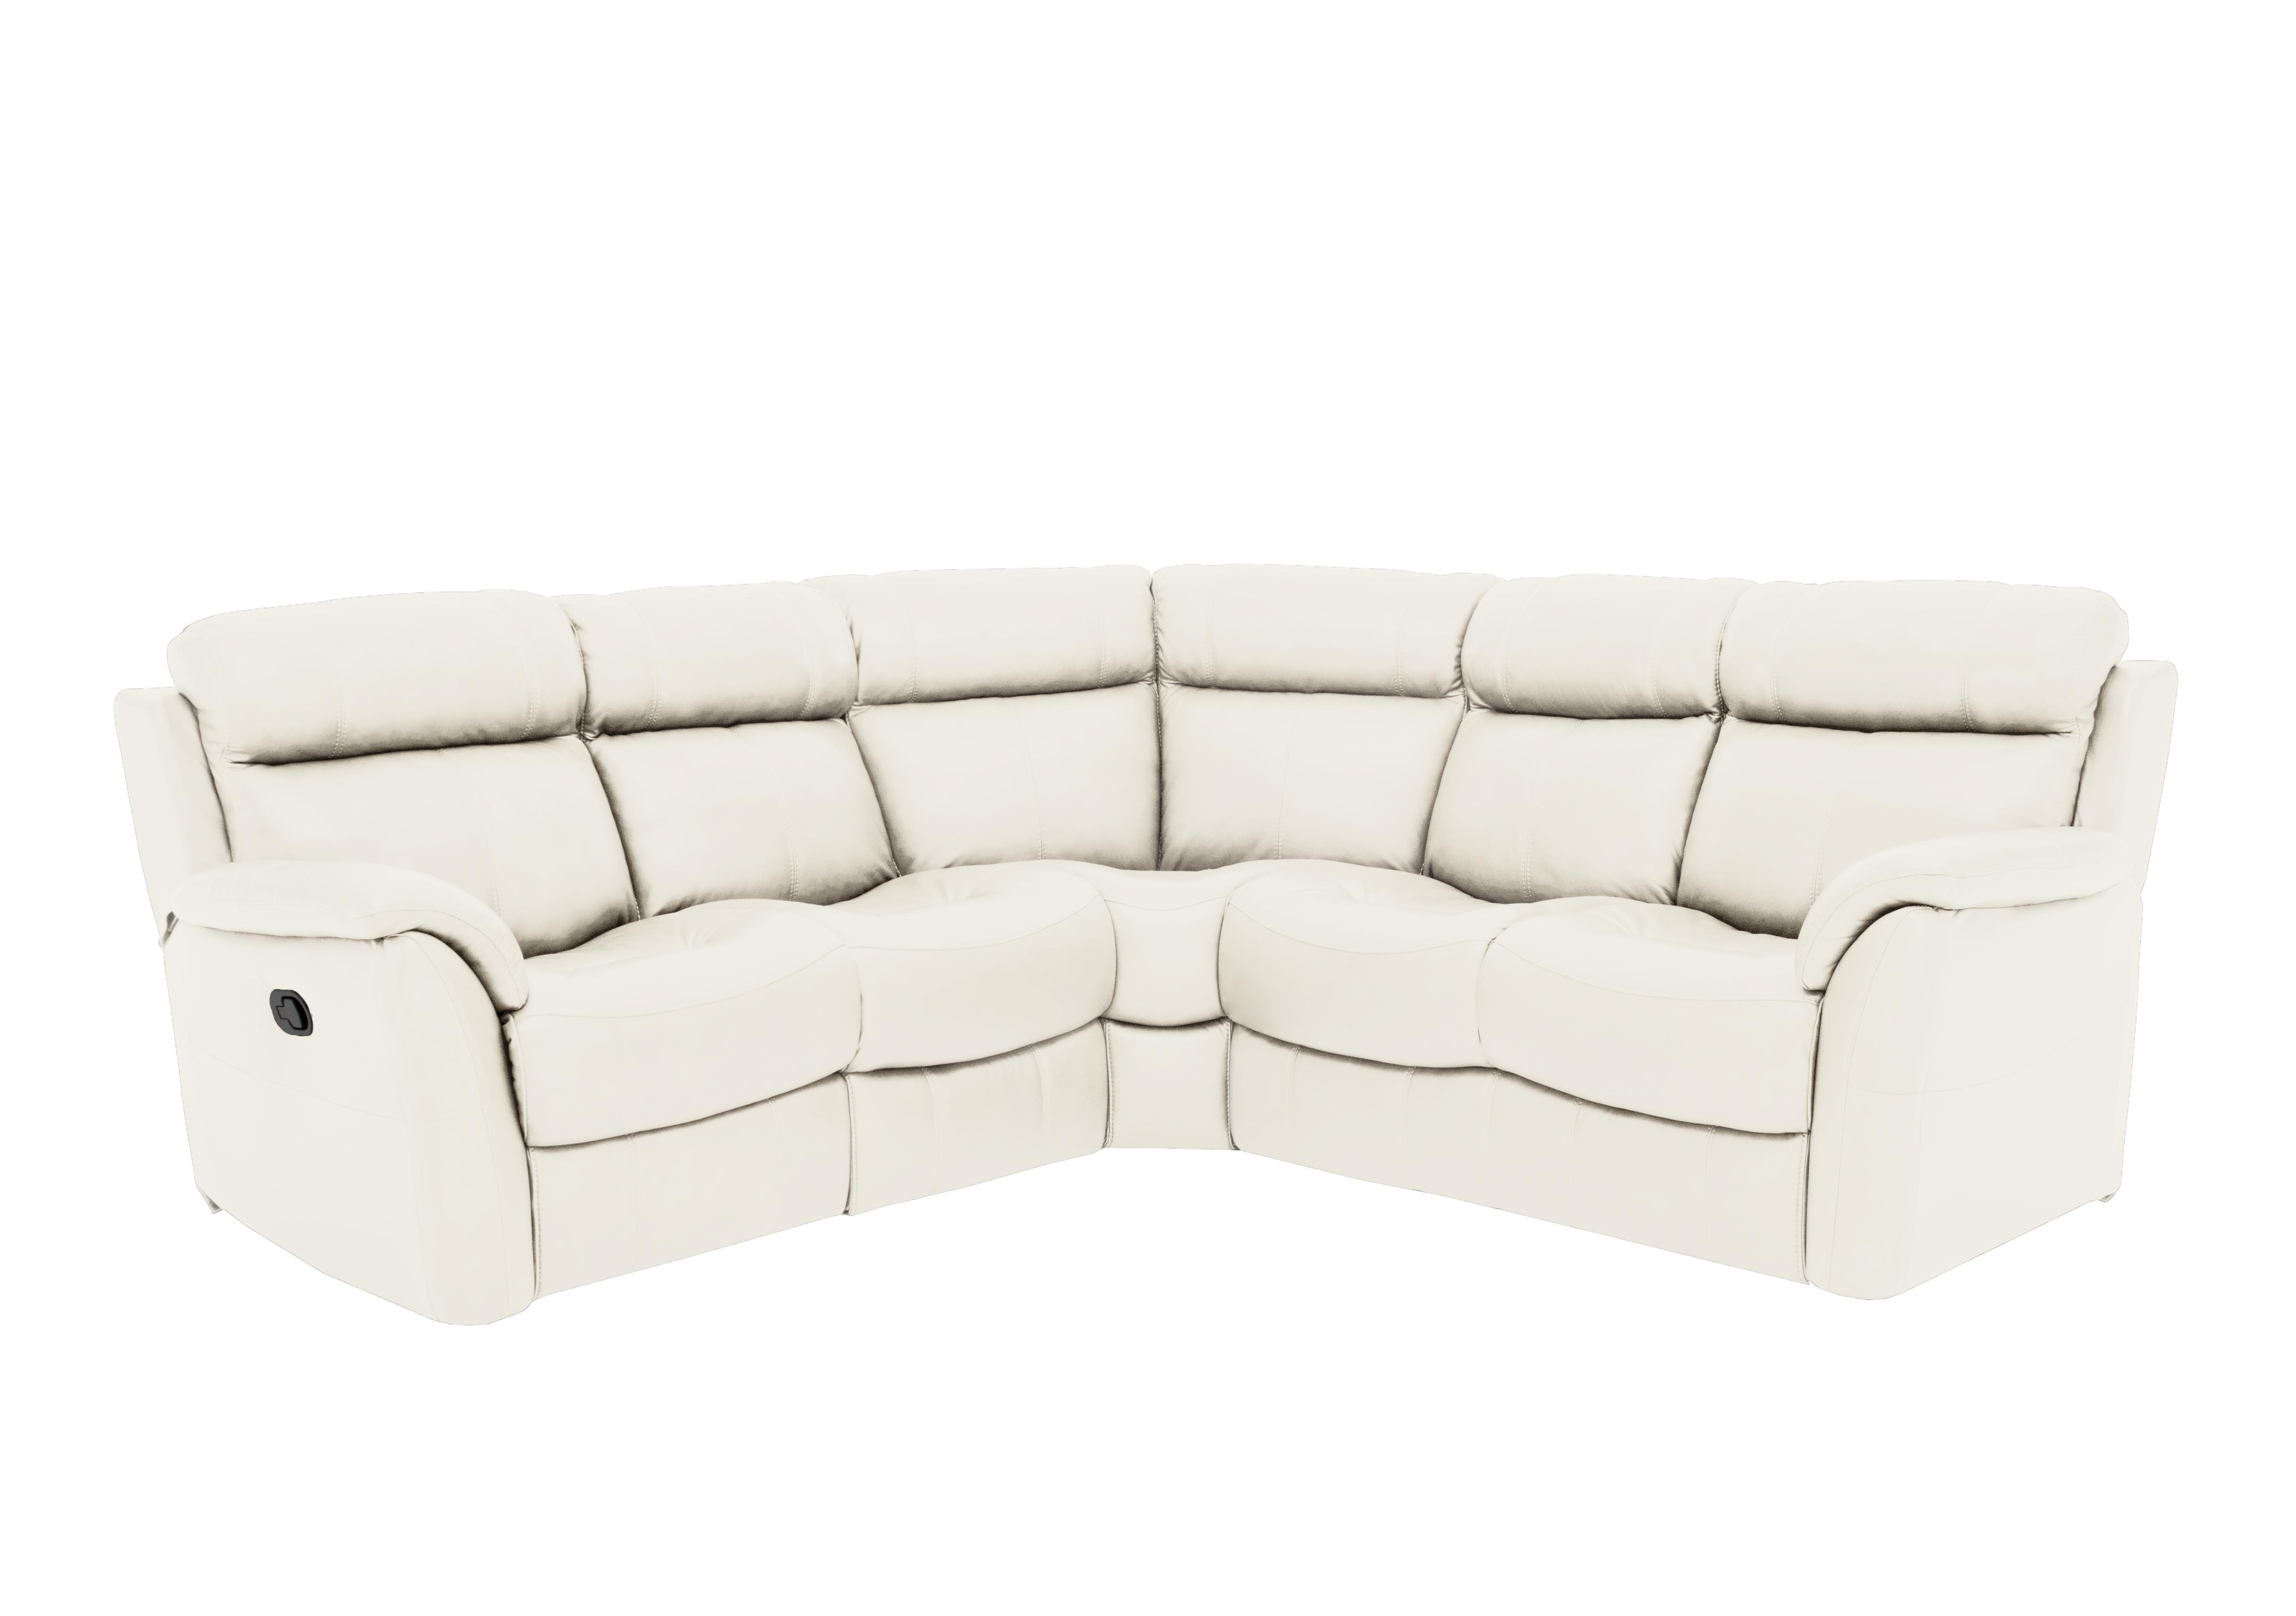 Relax Station Revive Leather Corner Sofa in Bv-744d Star White on Furniture Village